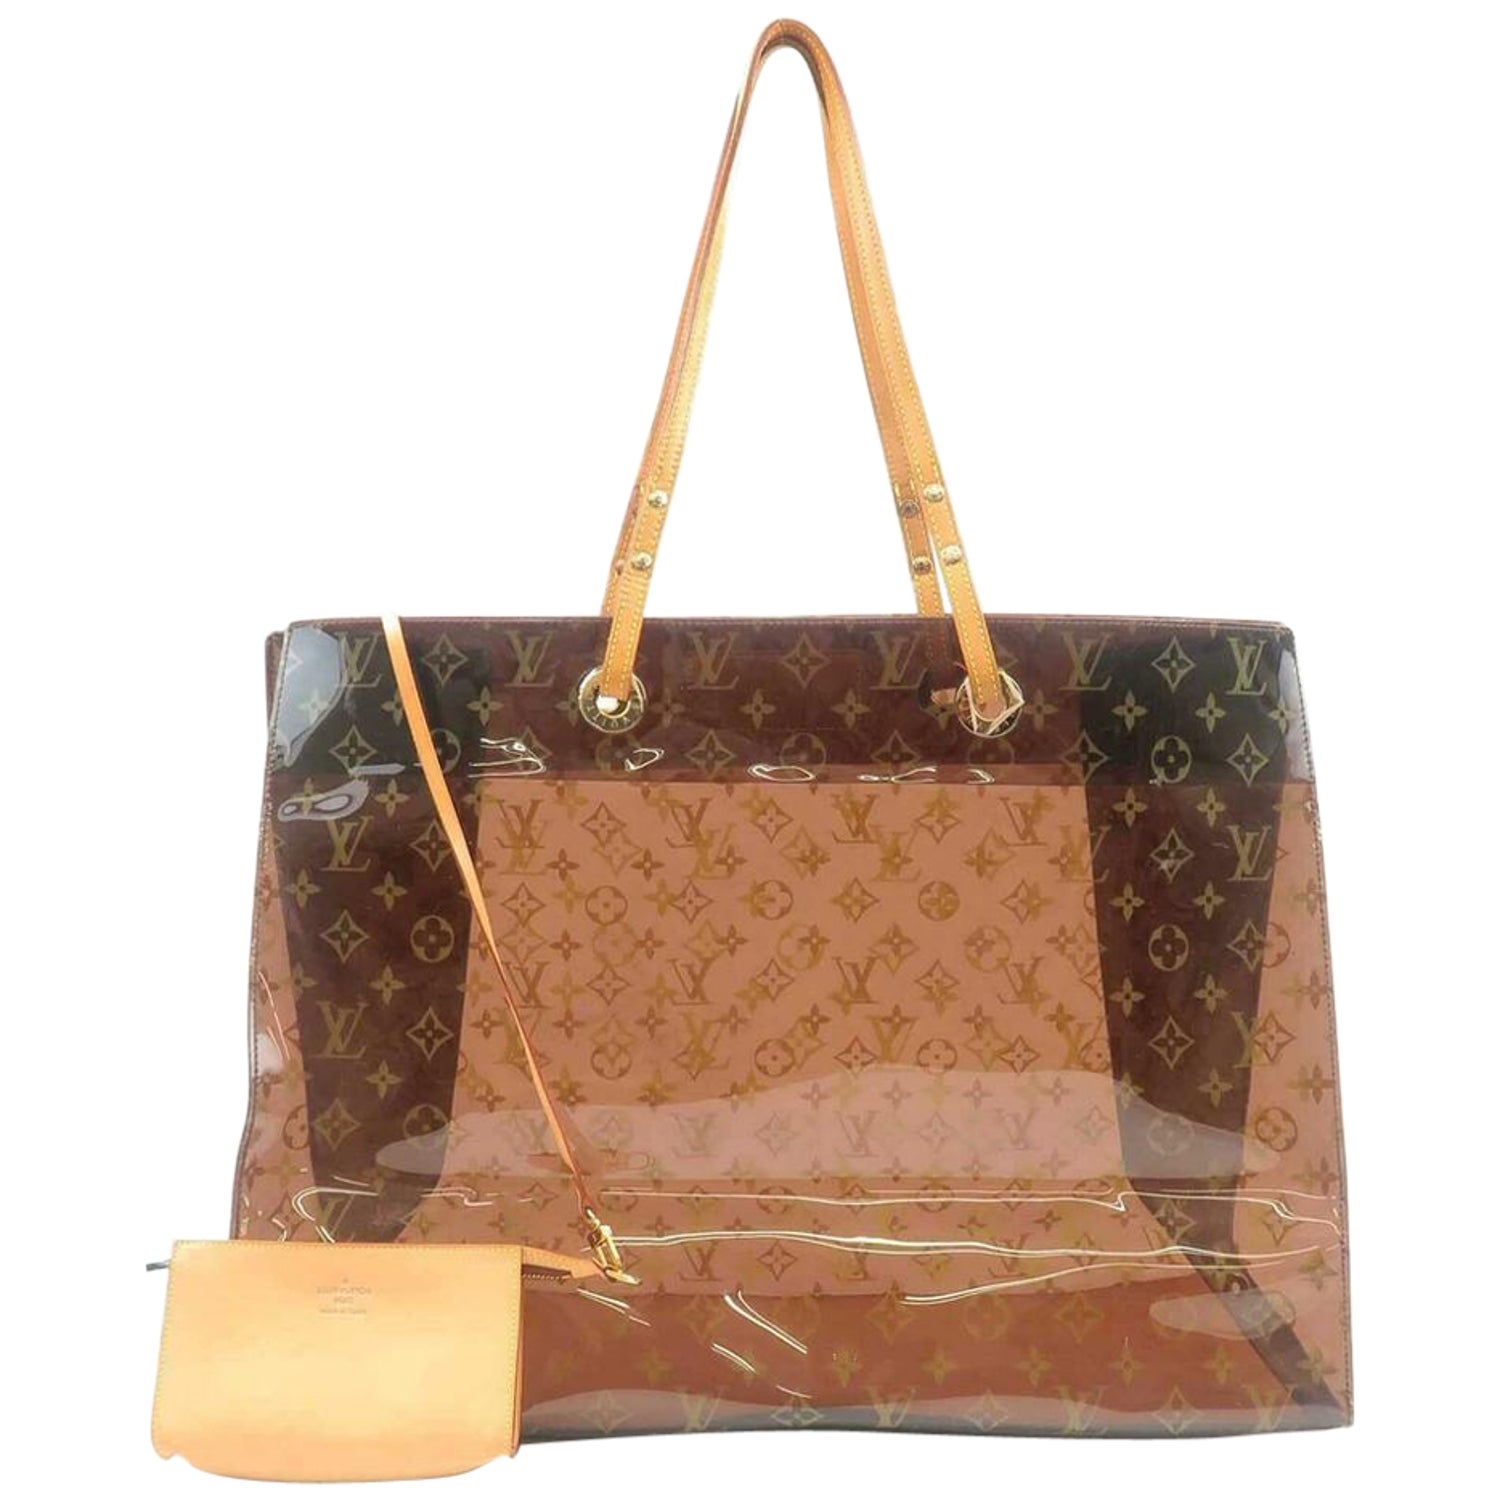 Louis Vuitton, Bags, Louis Vuitton Globe Shopper Mm Cabas Trunks And Bags  Cruise Collection Tote Bag